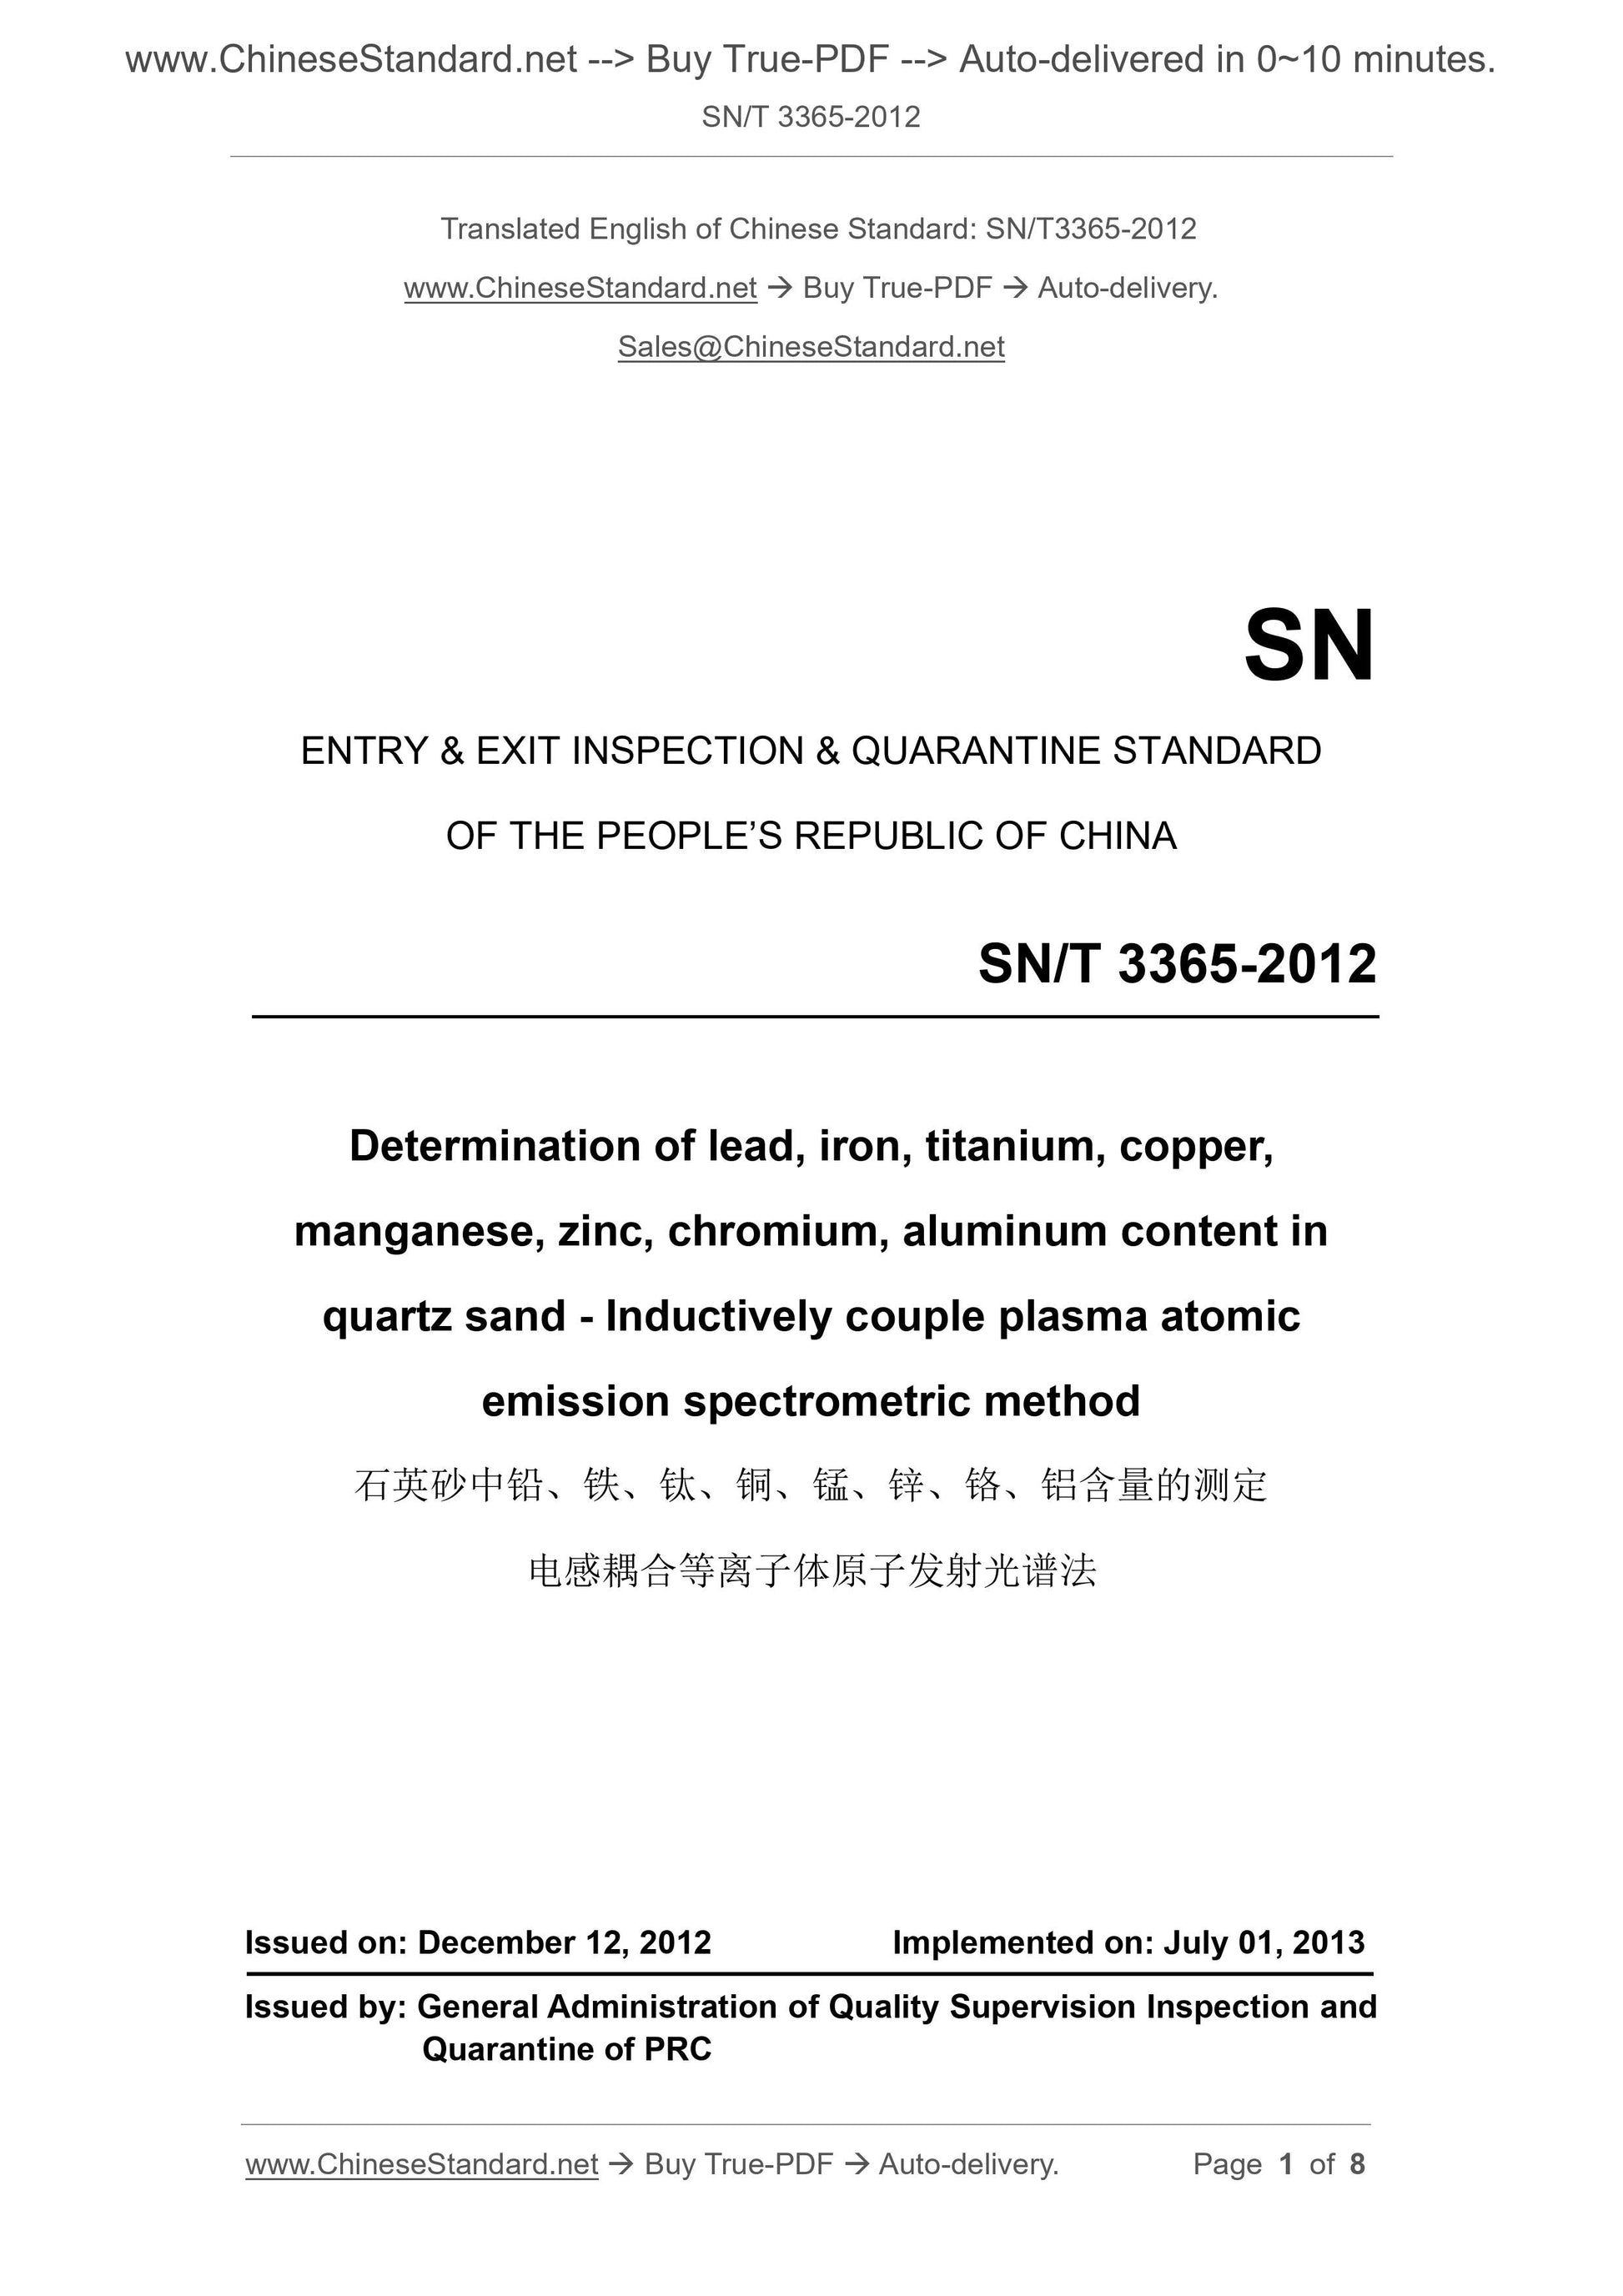 SN/T 3365-2012 Page 1